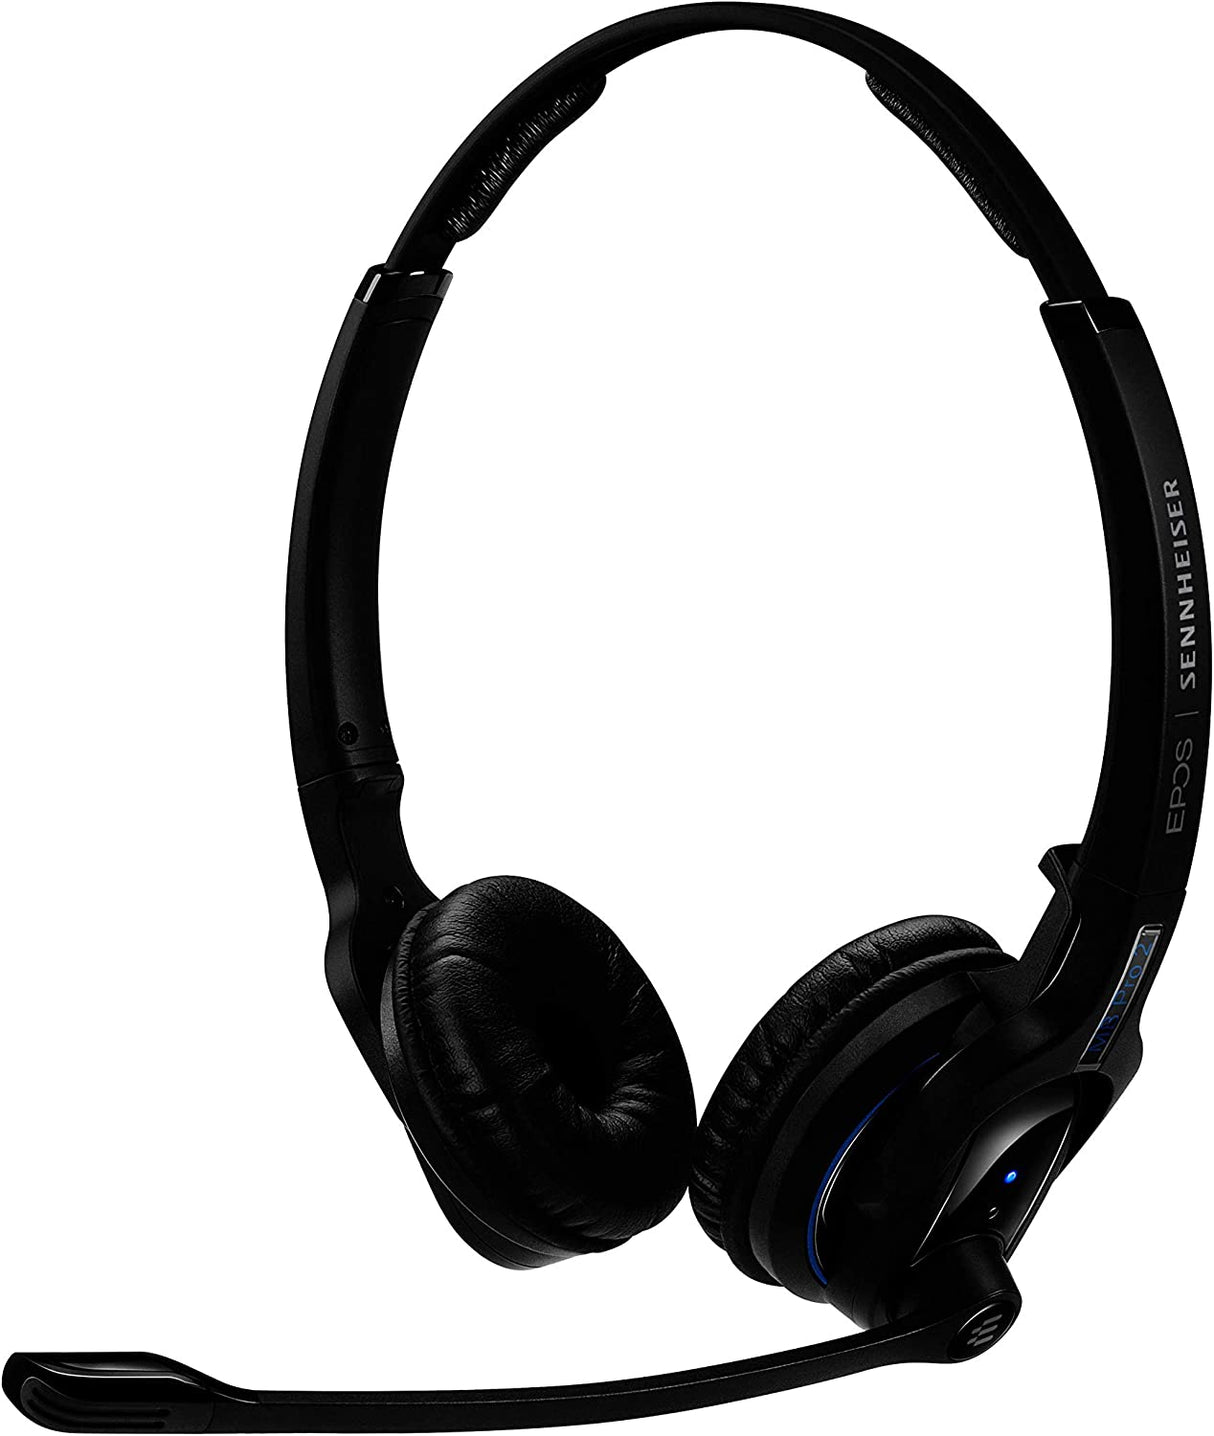 Epos Sennheiser MB Pro 2 (506044) - Dual-Sided, Wireless Bluetooth Headset | For Mobile Phone Connection | w/ HD Sound &amp; Noise Cancelling Microphone (Black)